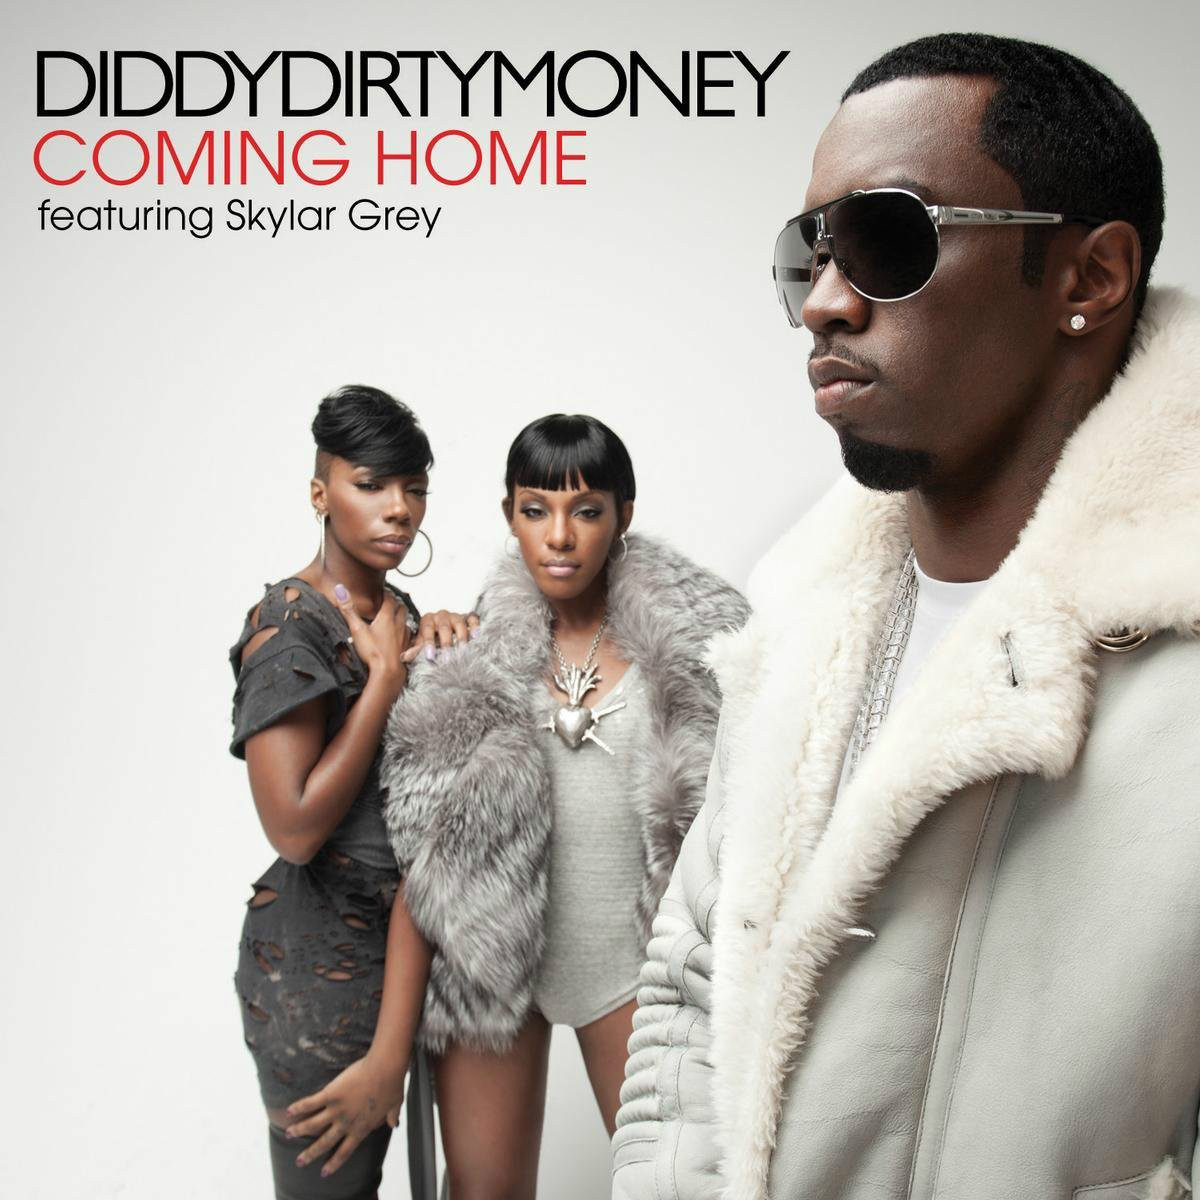 Coming Home(Diddy - Dirty Money歌曲)